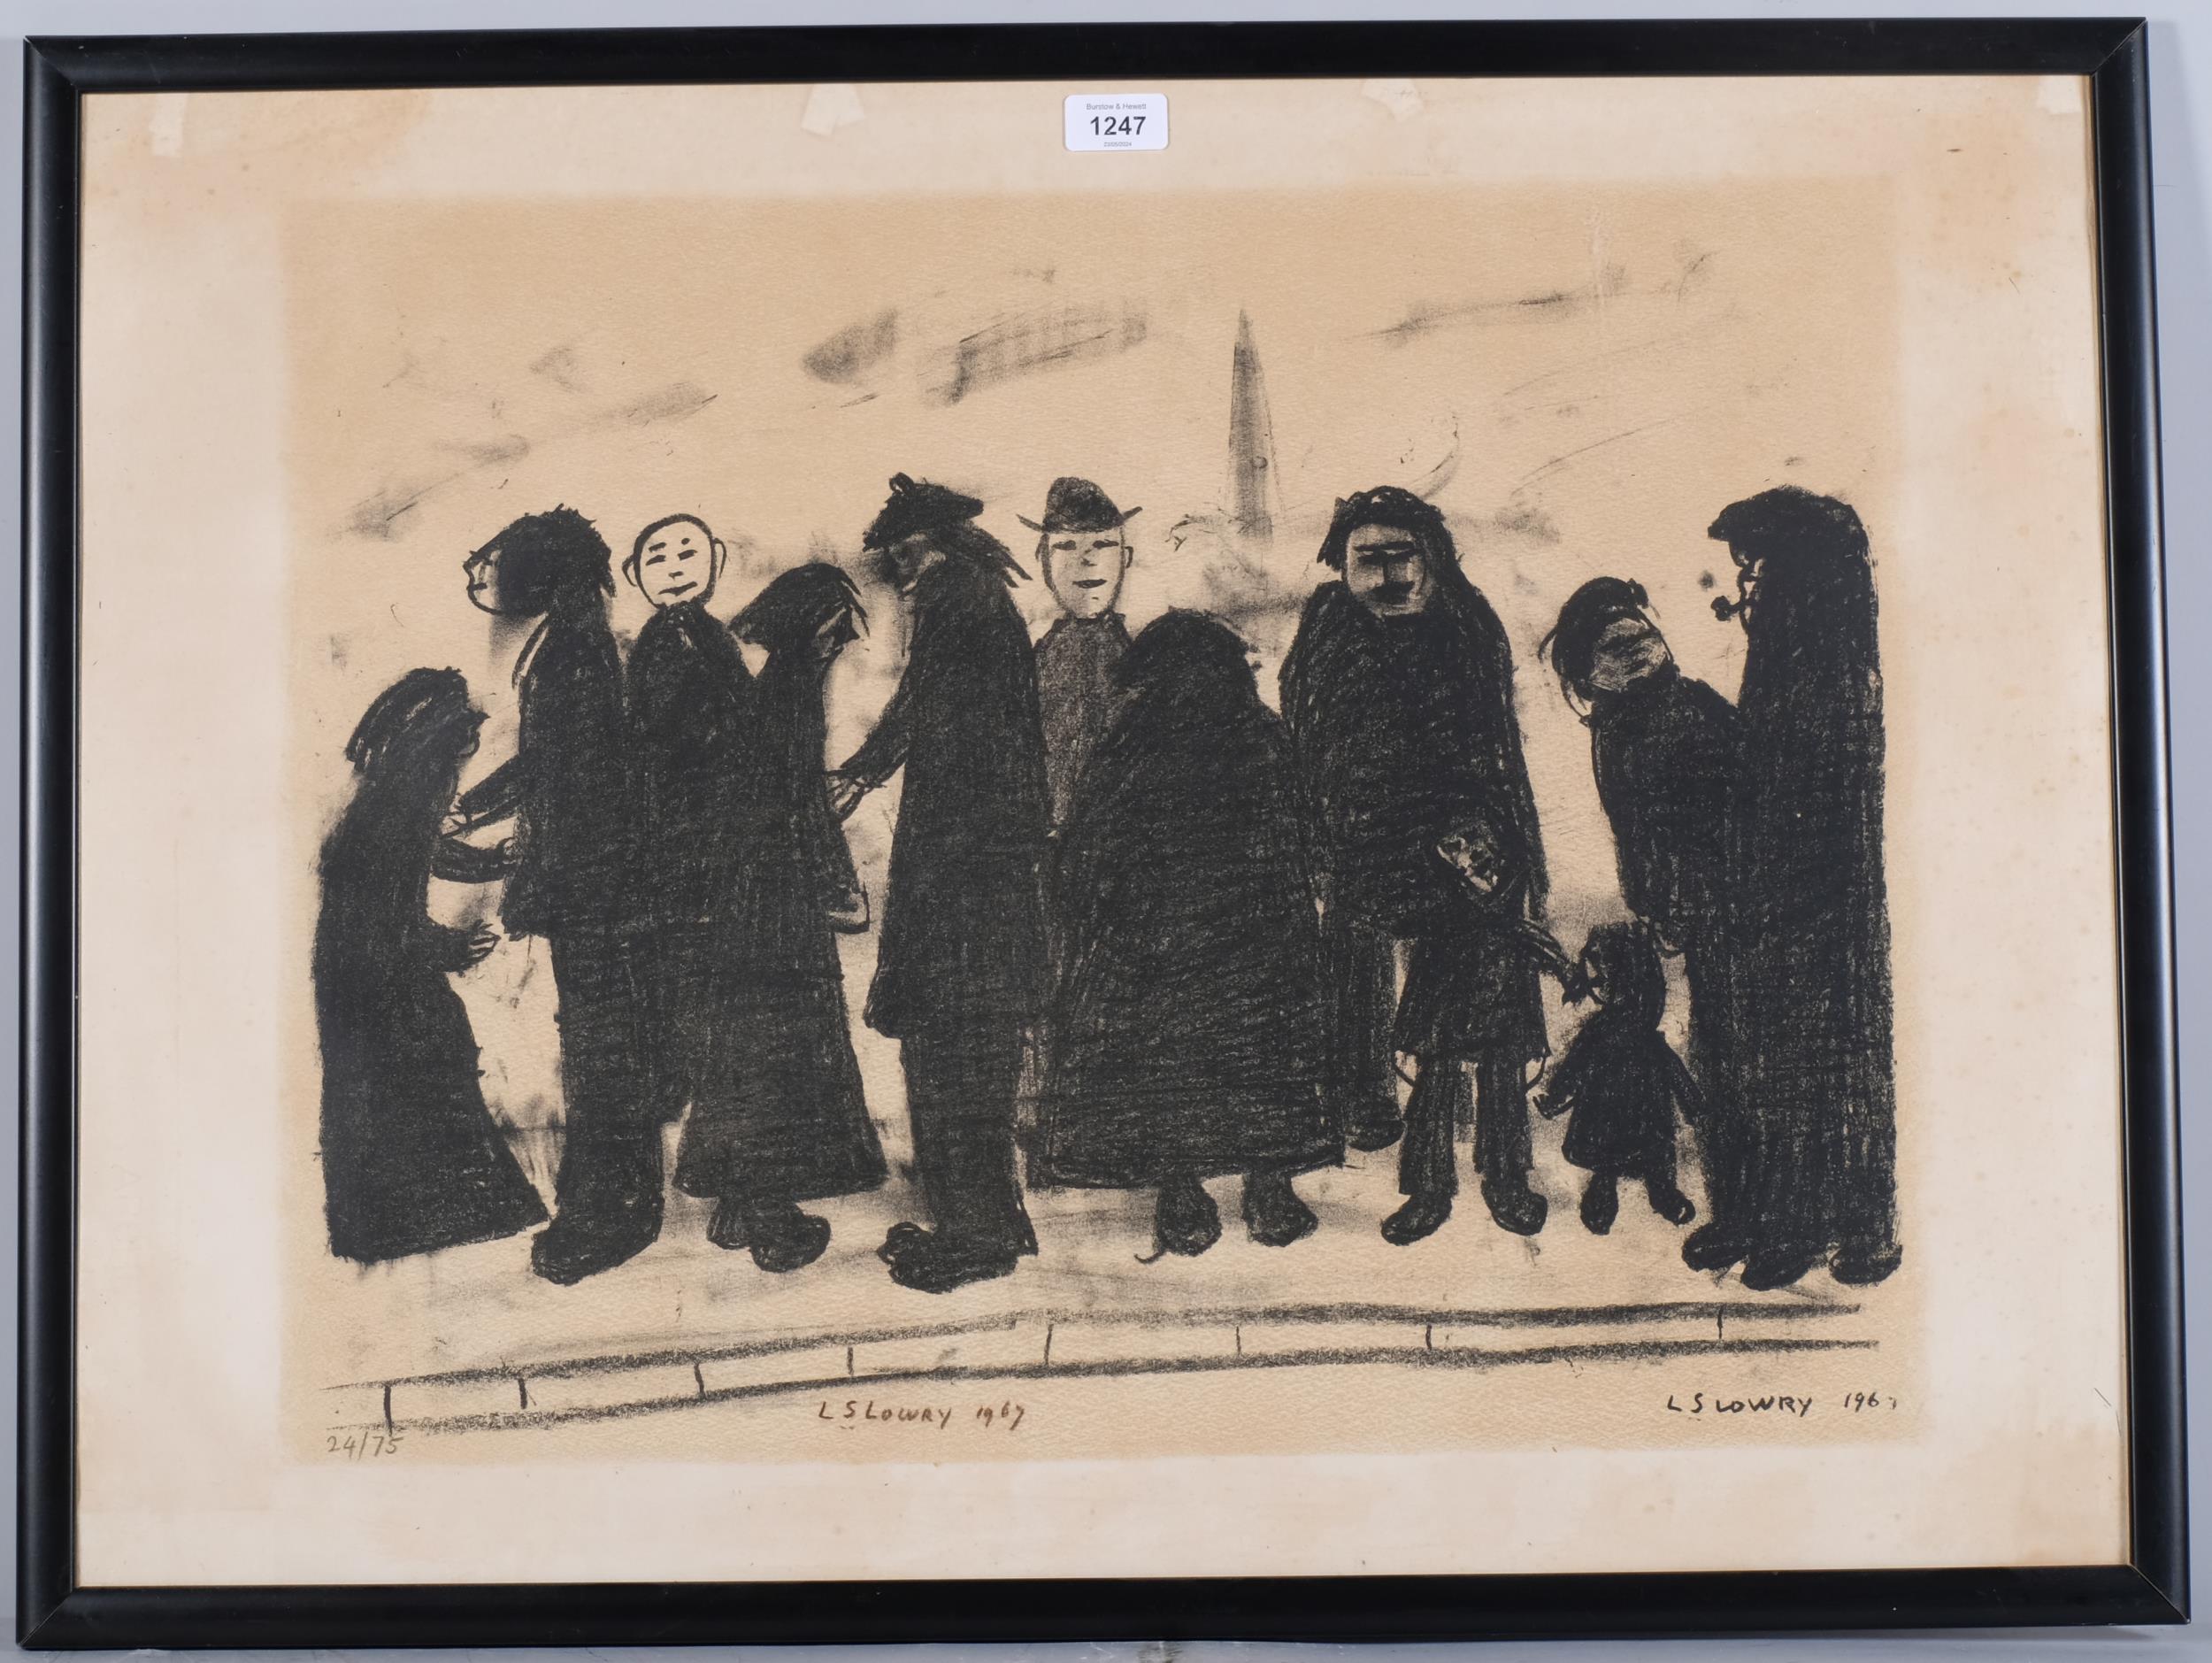 Laurence Stephen Lowry (1887 - 1976), Shapes And Sizes, 1967, lithograph, image 46cm x 60cm, no. - Bild 2 aus 4